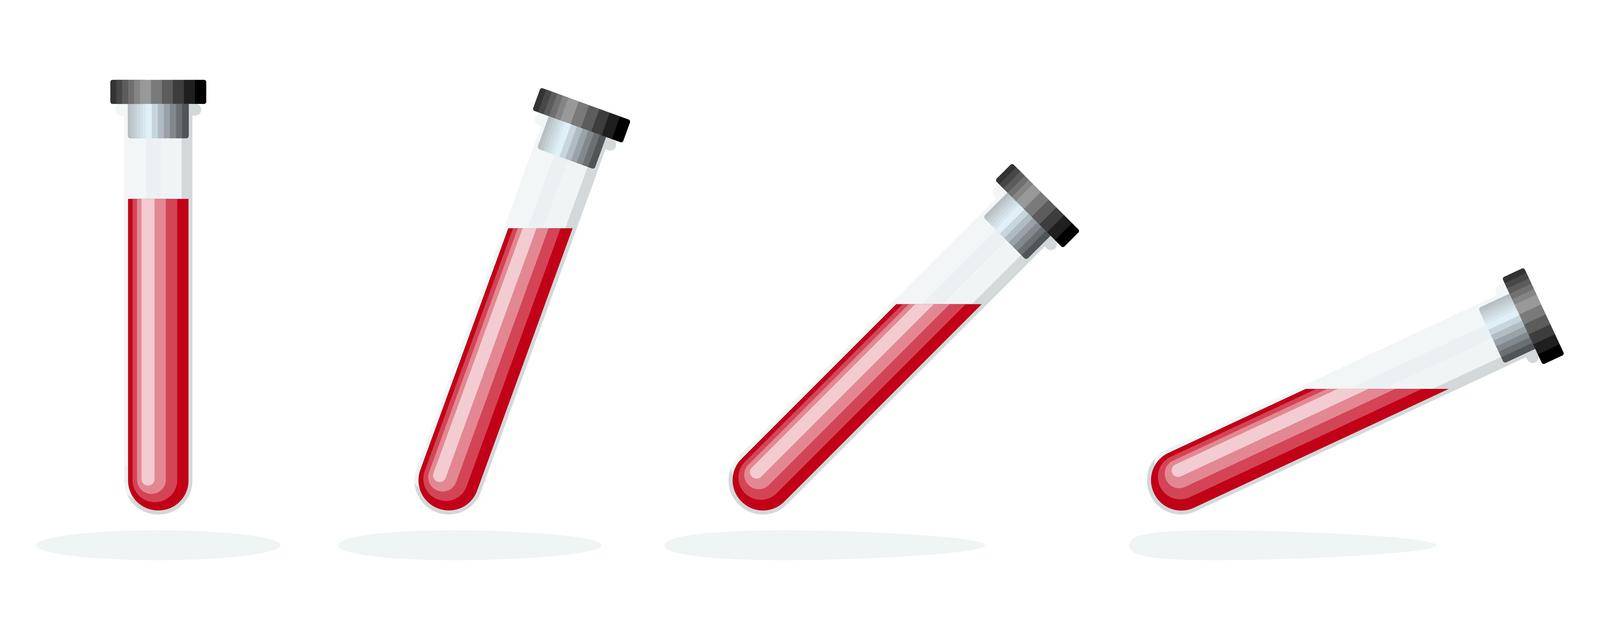 Blood test. Blood samples in a glass test tubes. by Chekman